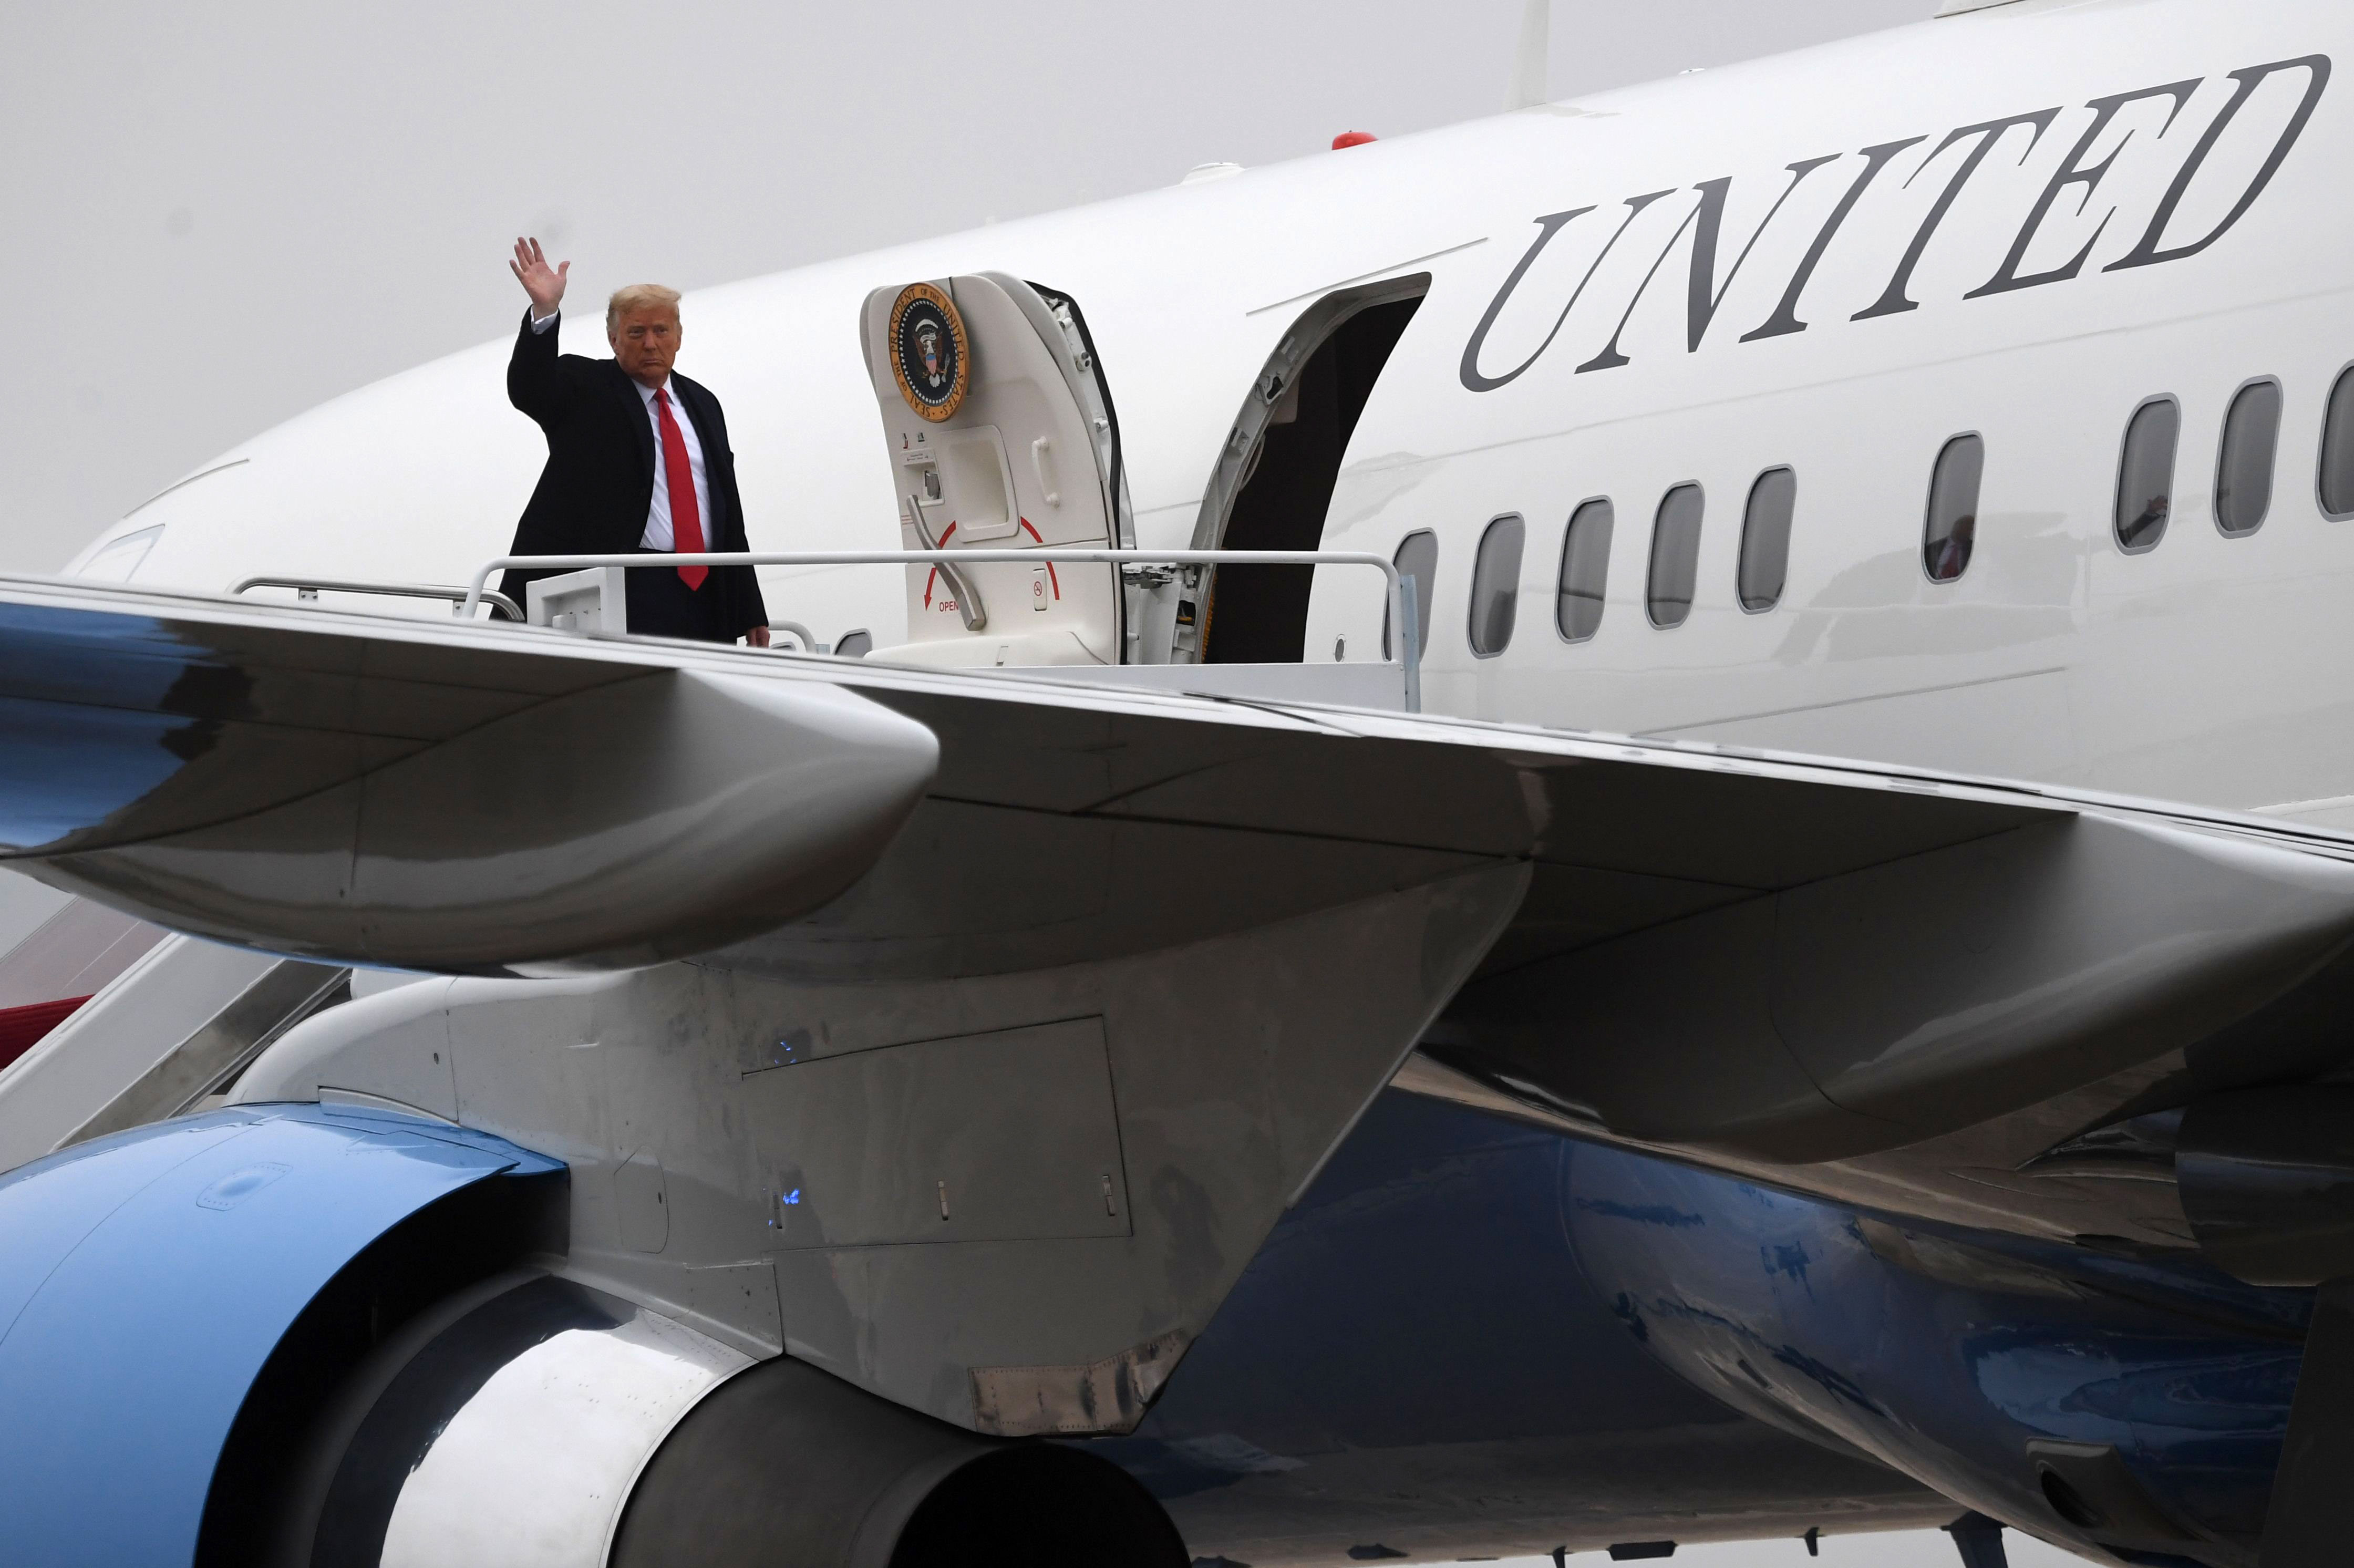 President Donald Trump boards Air Force One on October 26, prior to departure from Joint Base Andrews in Maryland.